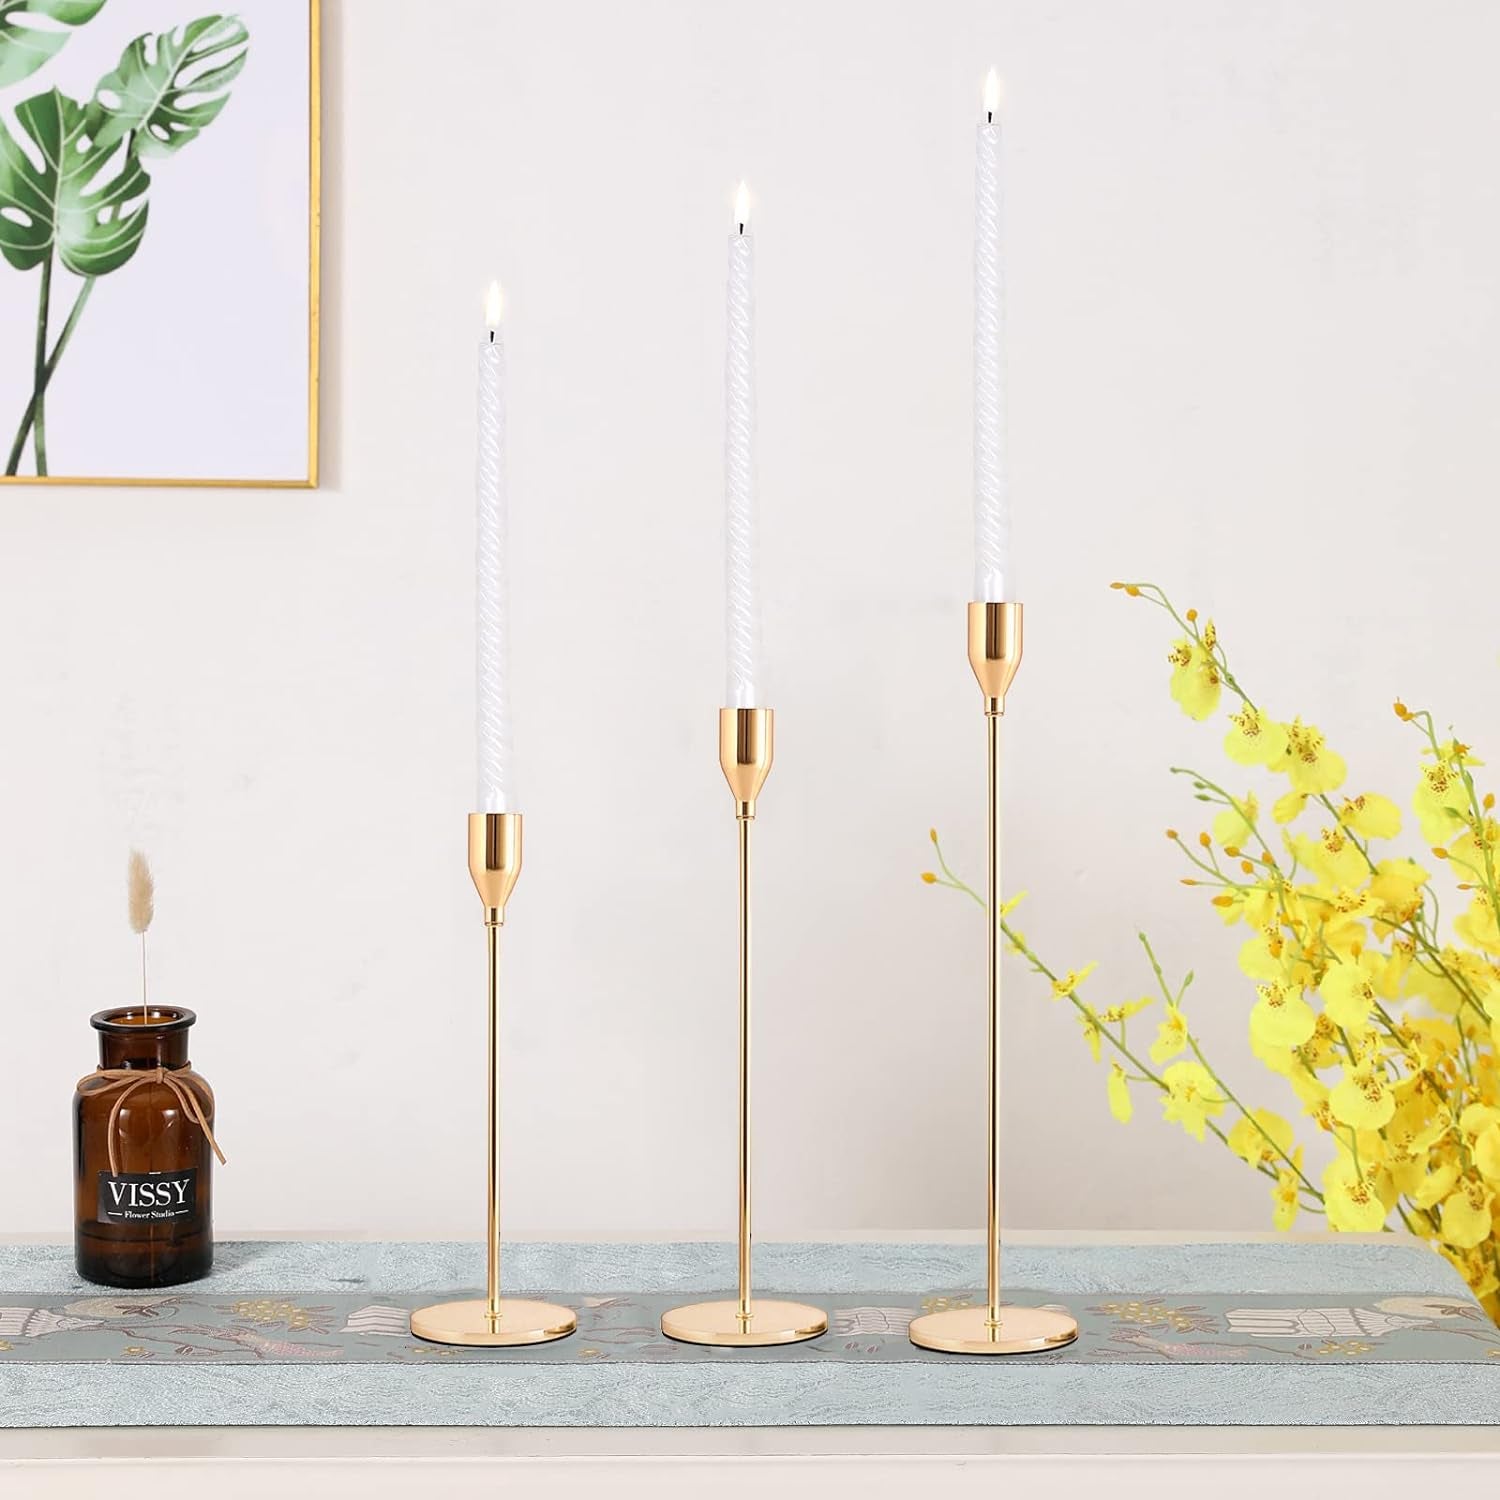 Rose Gold Candlestick Holders Set of 3 - Metal Tall Candle Stand for Taper Candles - Decorative Centerpiece for Party Wedding, Dining, Living Room - Fits 3/4 Inch Thick Candles & LED Candles